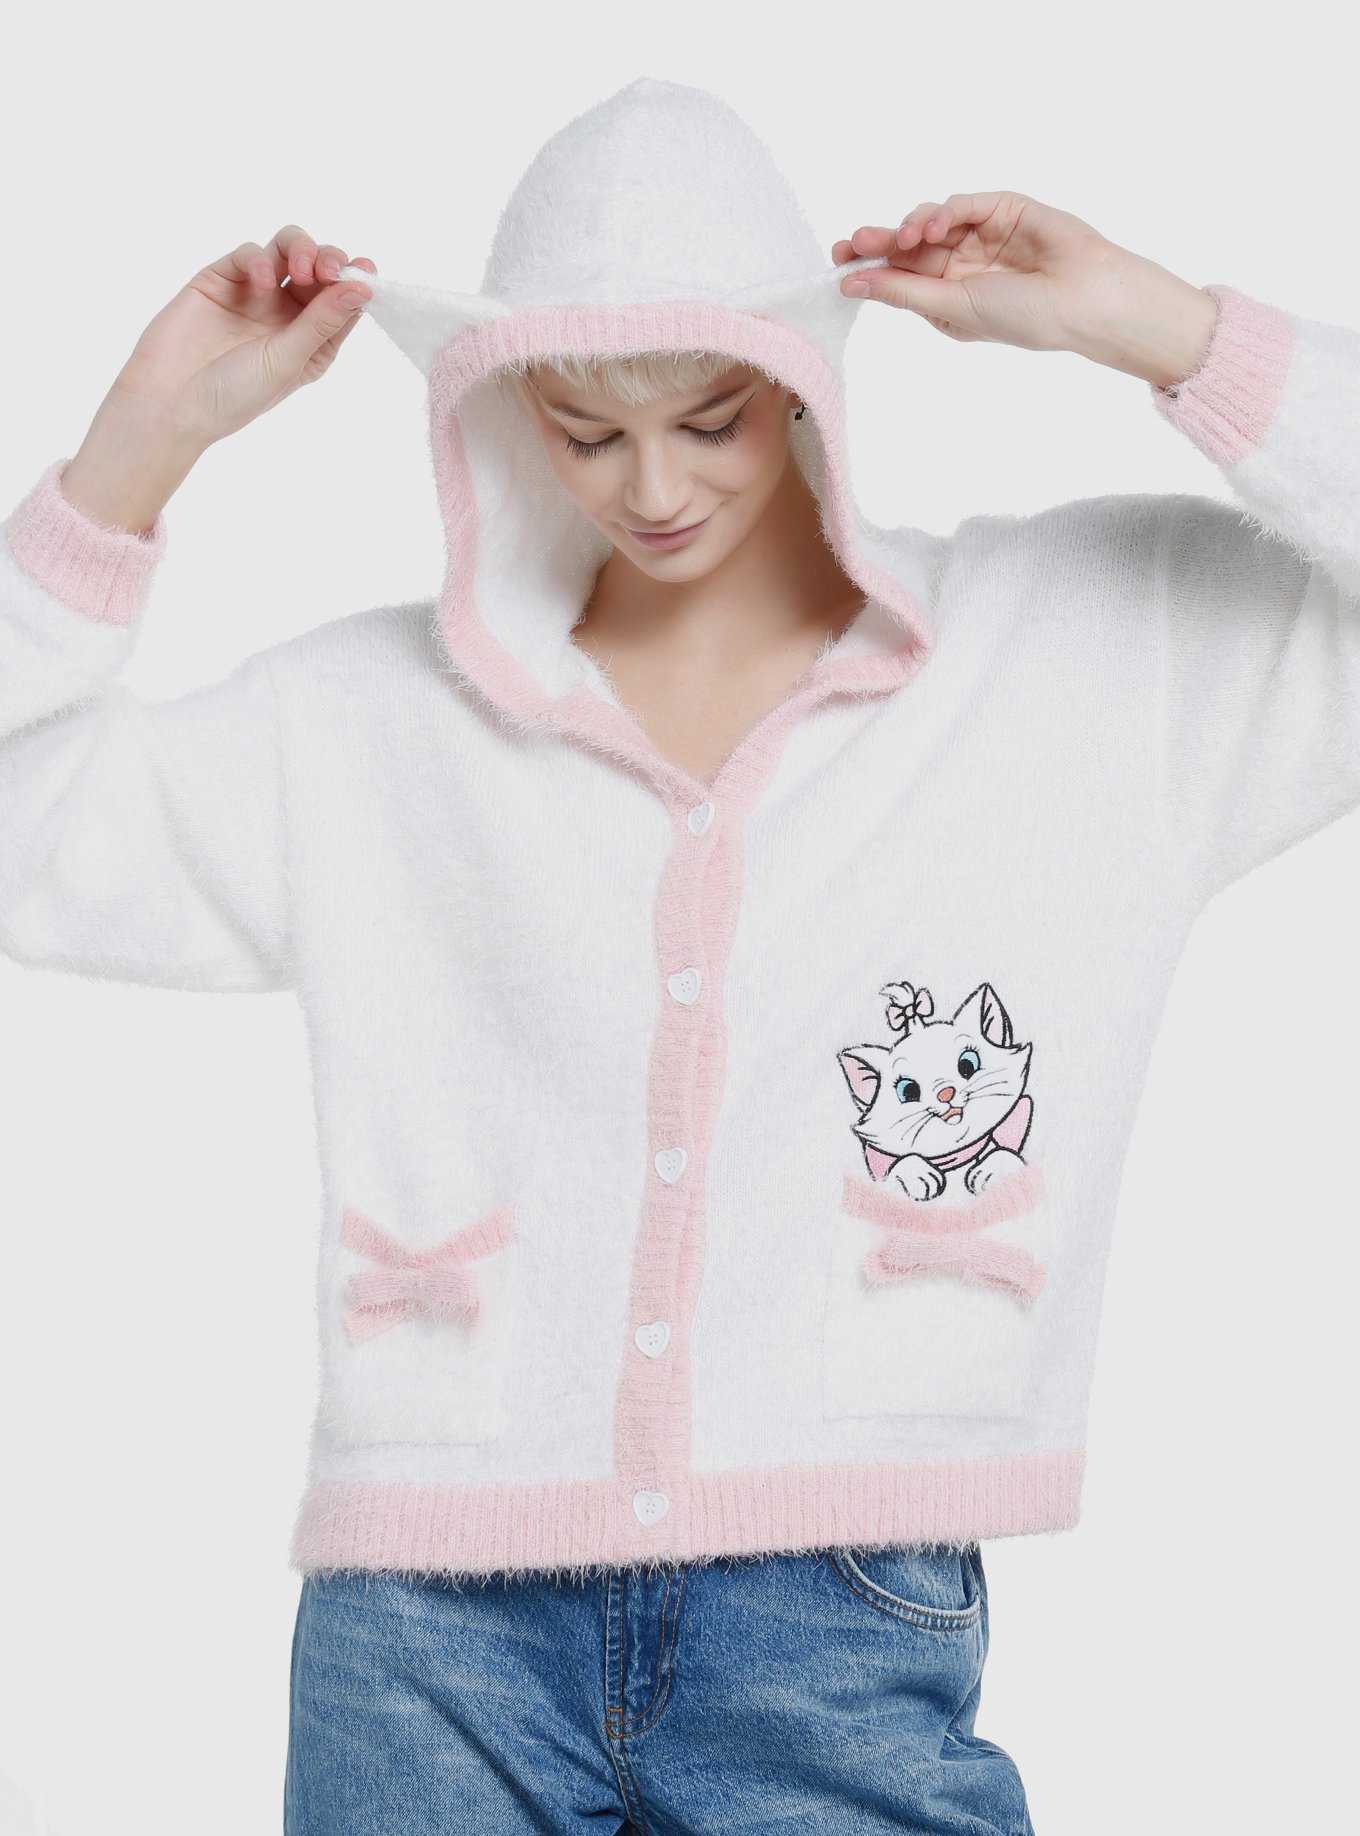 BNWT Disney Hot Topic Plus Size 2 (18/20) Pink The Aristocats